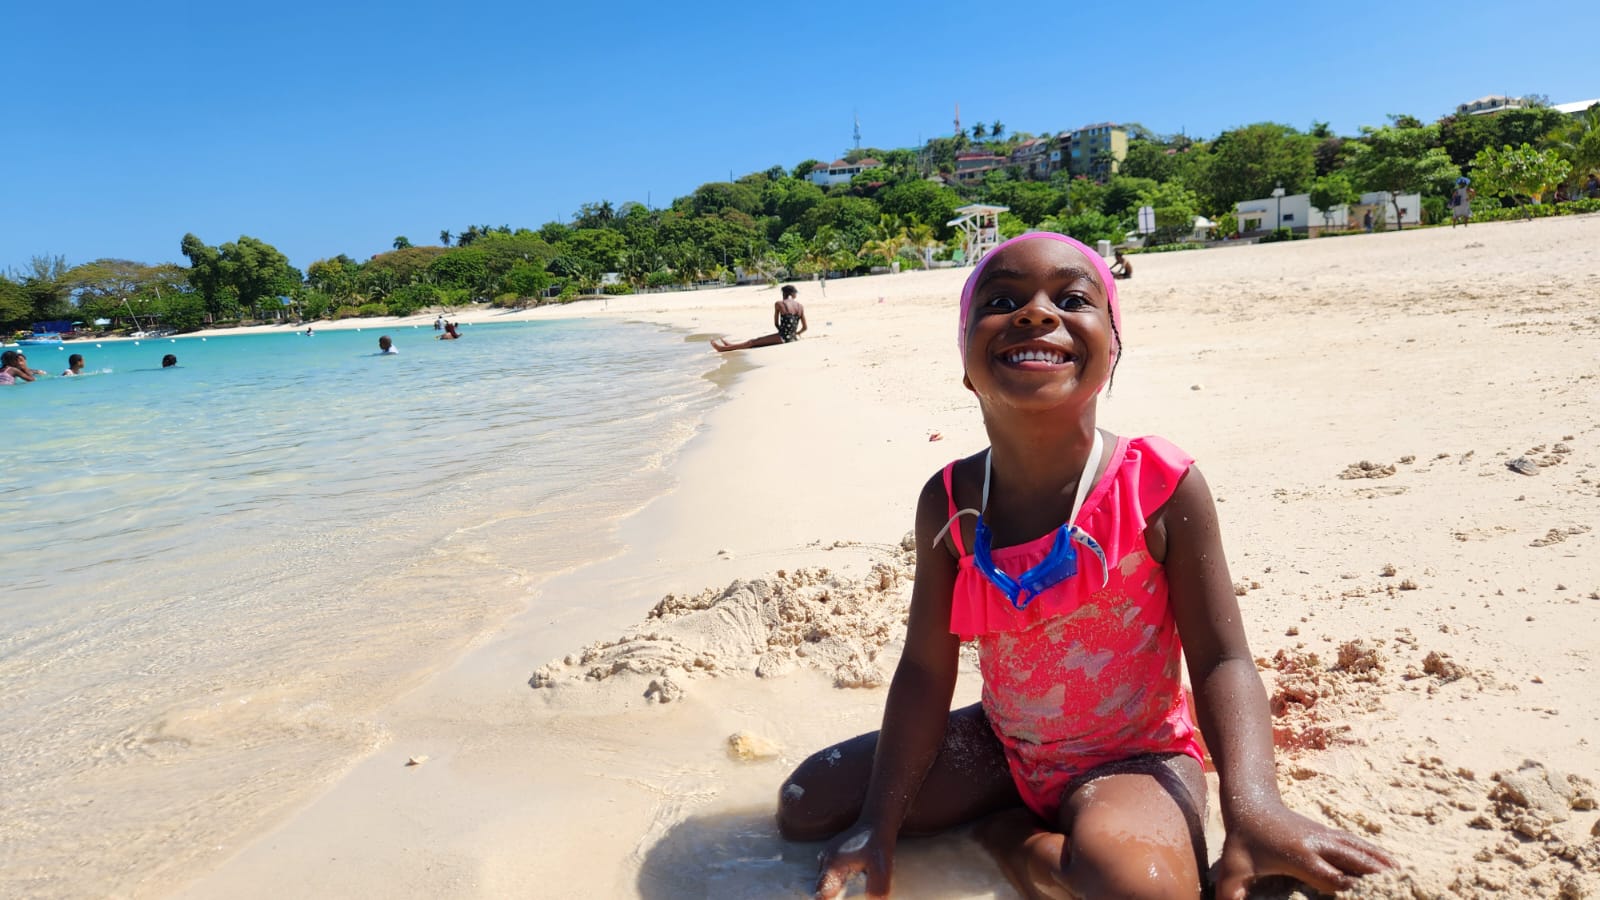 Planning that trip to Montego Bay Jamaica with your family soon? Here are the 10 best activities in Montego Bay for kids.